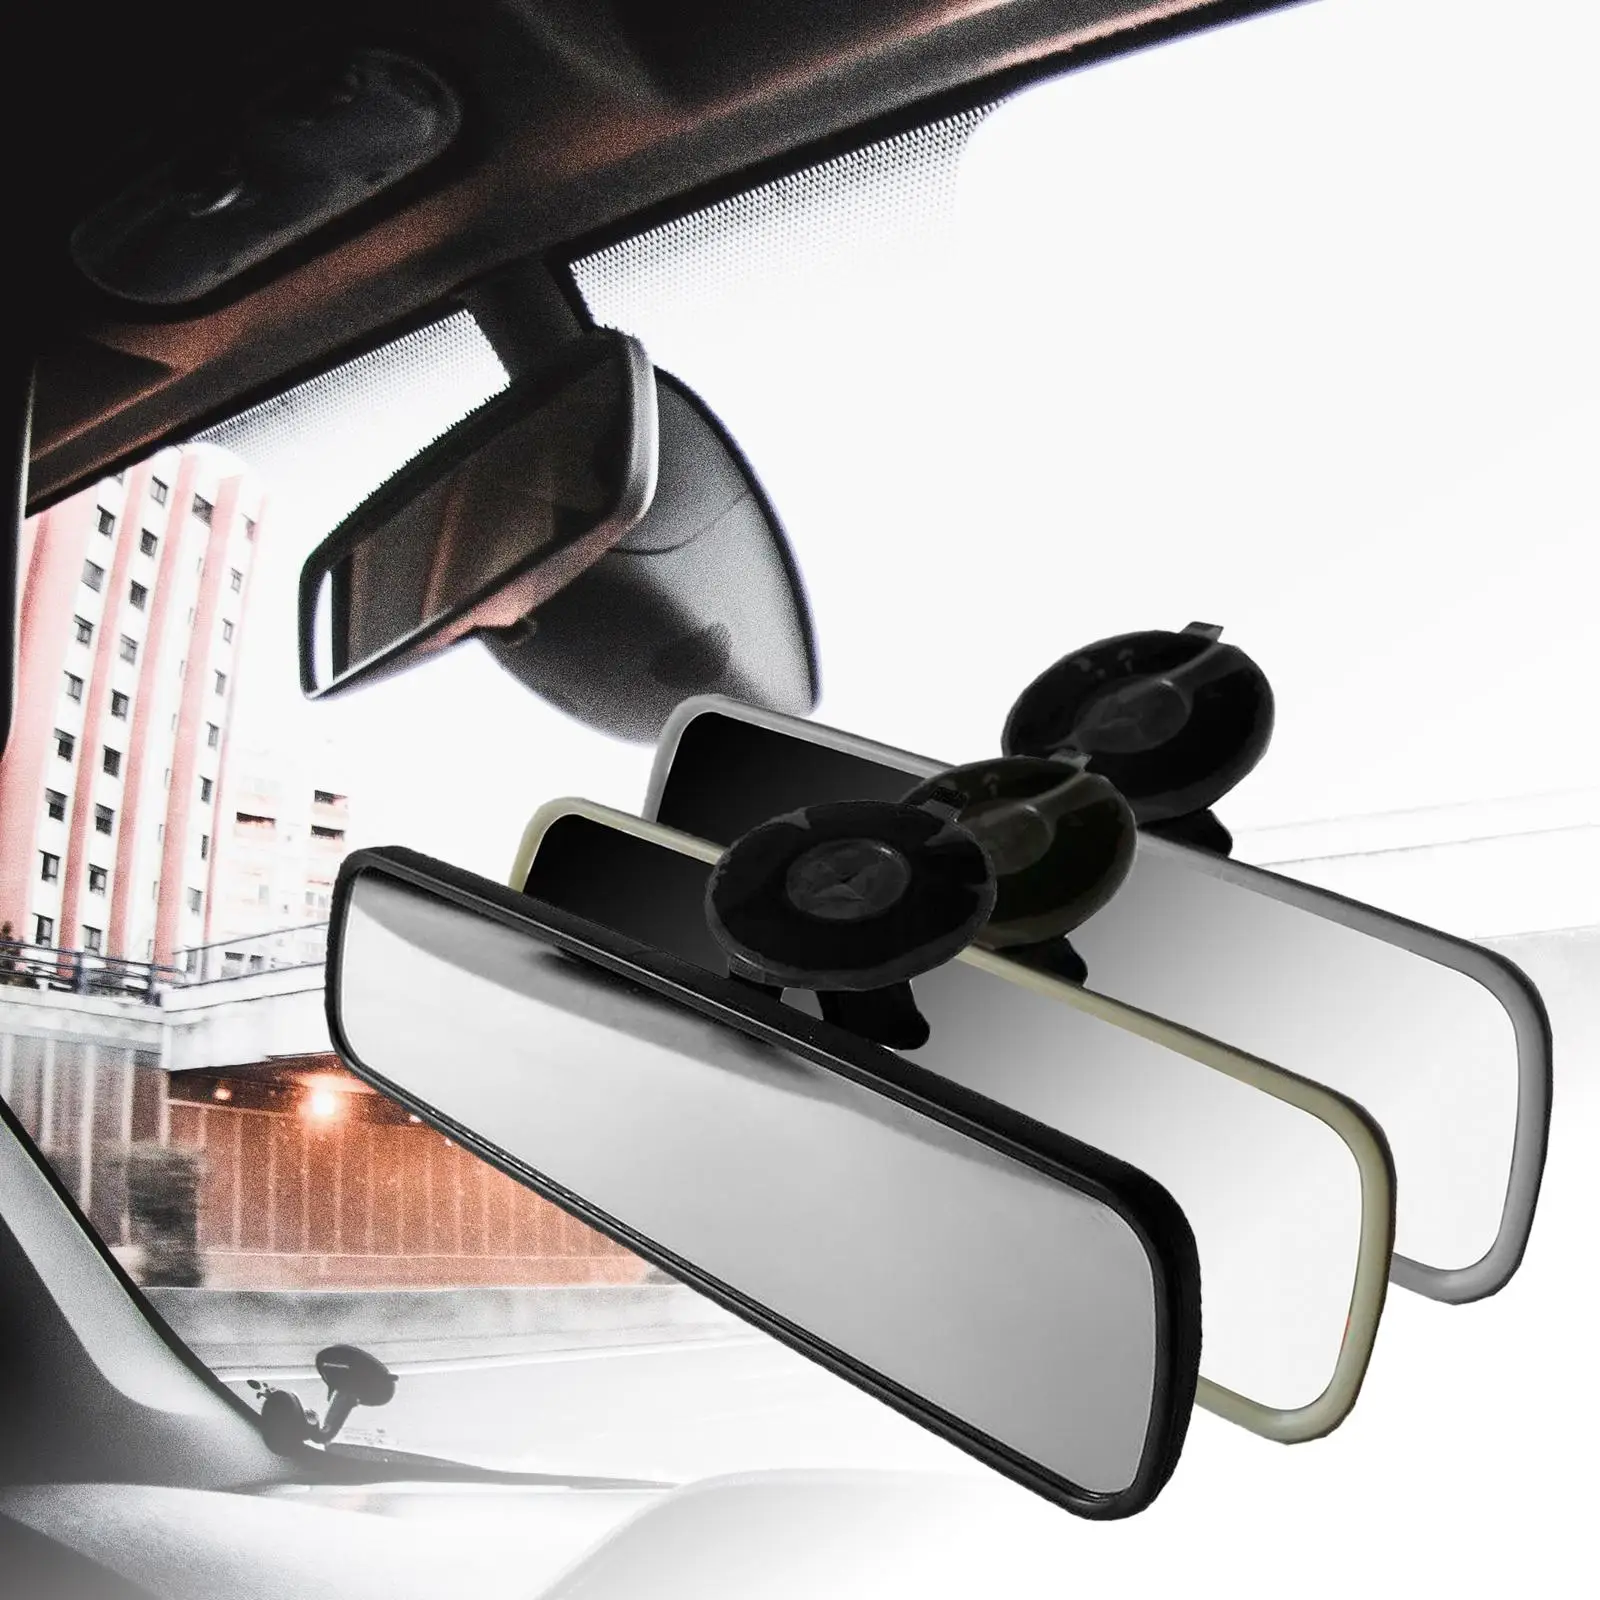 rear mirror Adjustable with Suction Cup Car Interior for Trucks SUV Car